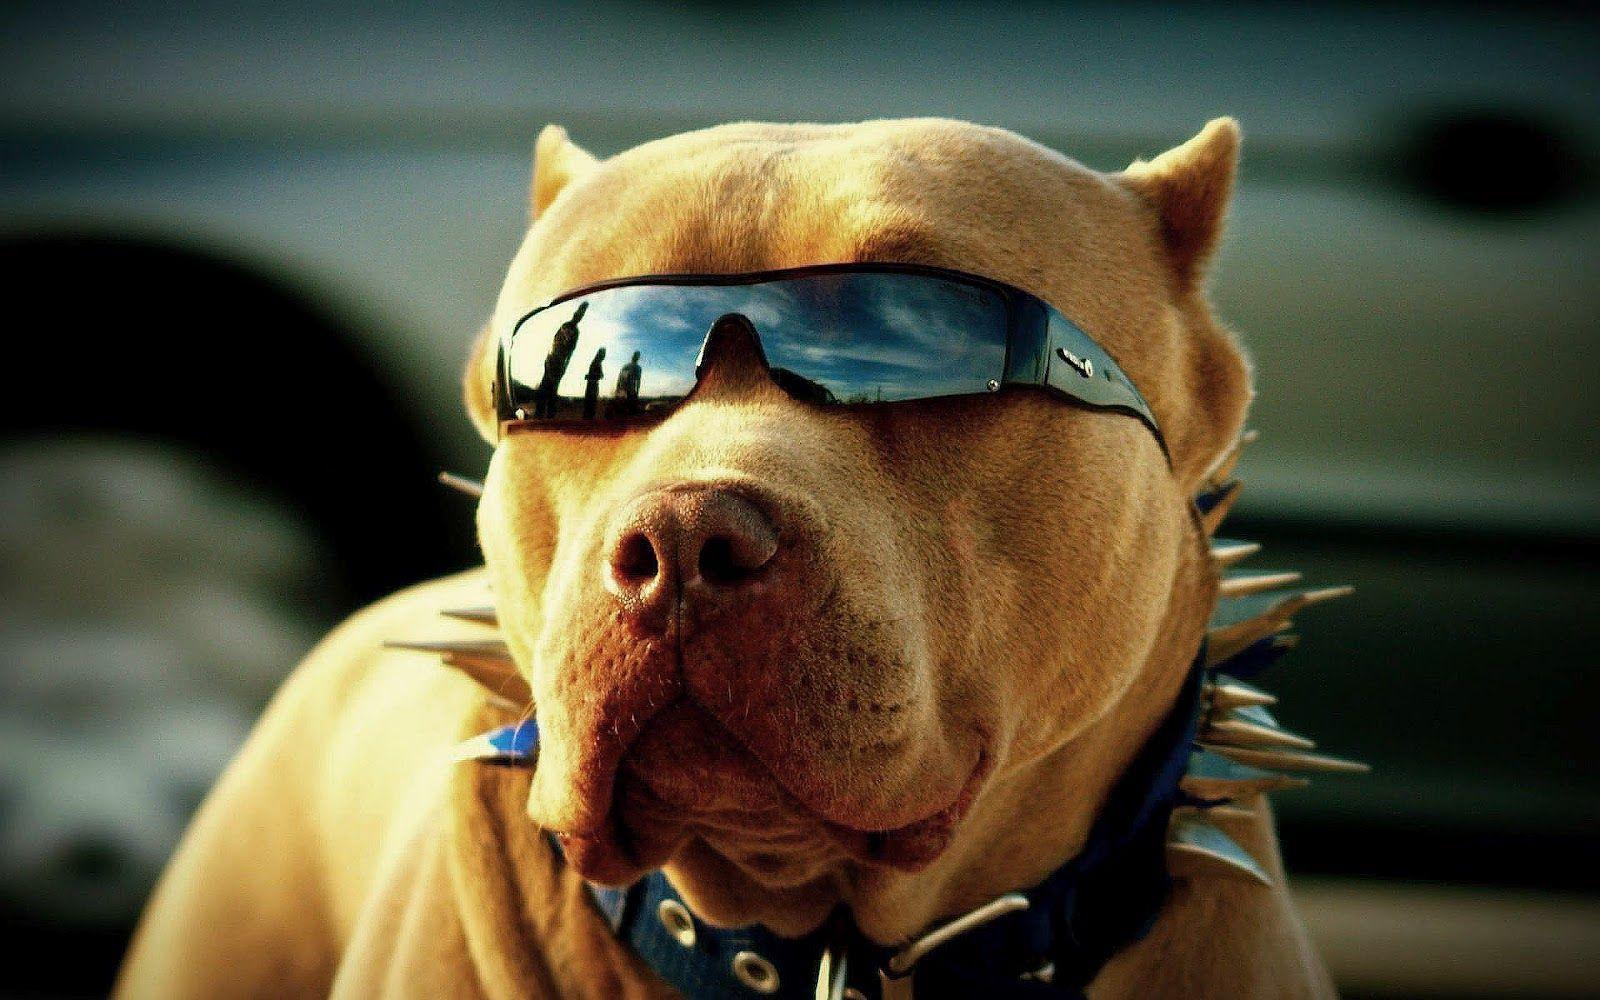 Cool Dog Backgrounds